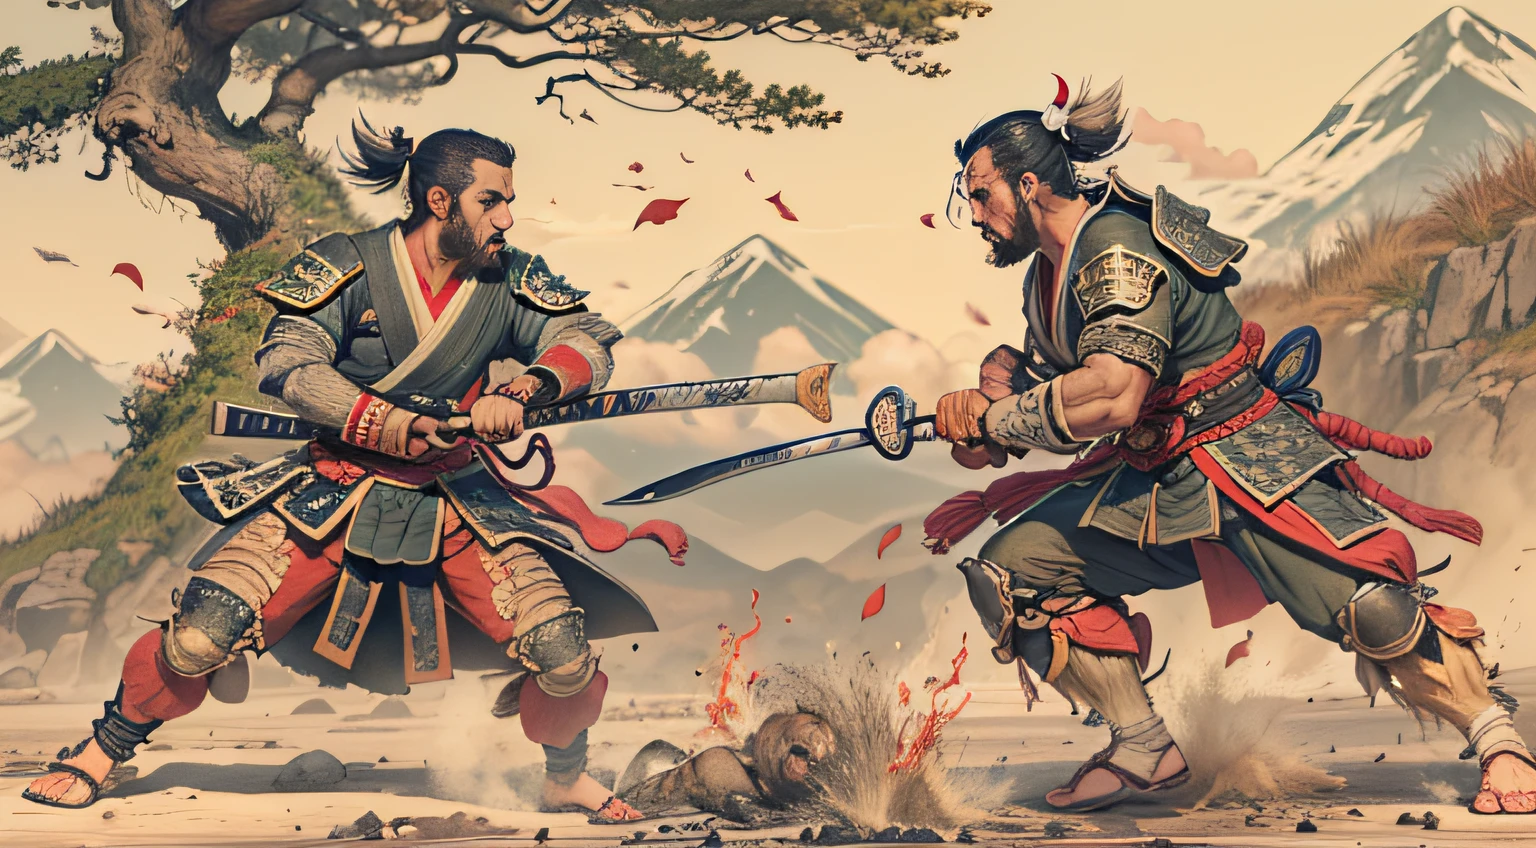 fight of two samurai fighting, with various wounds on the body, in a beautiful, stunning environment